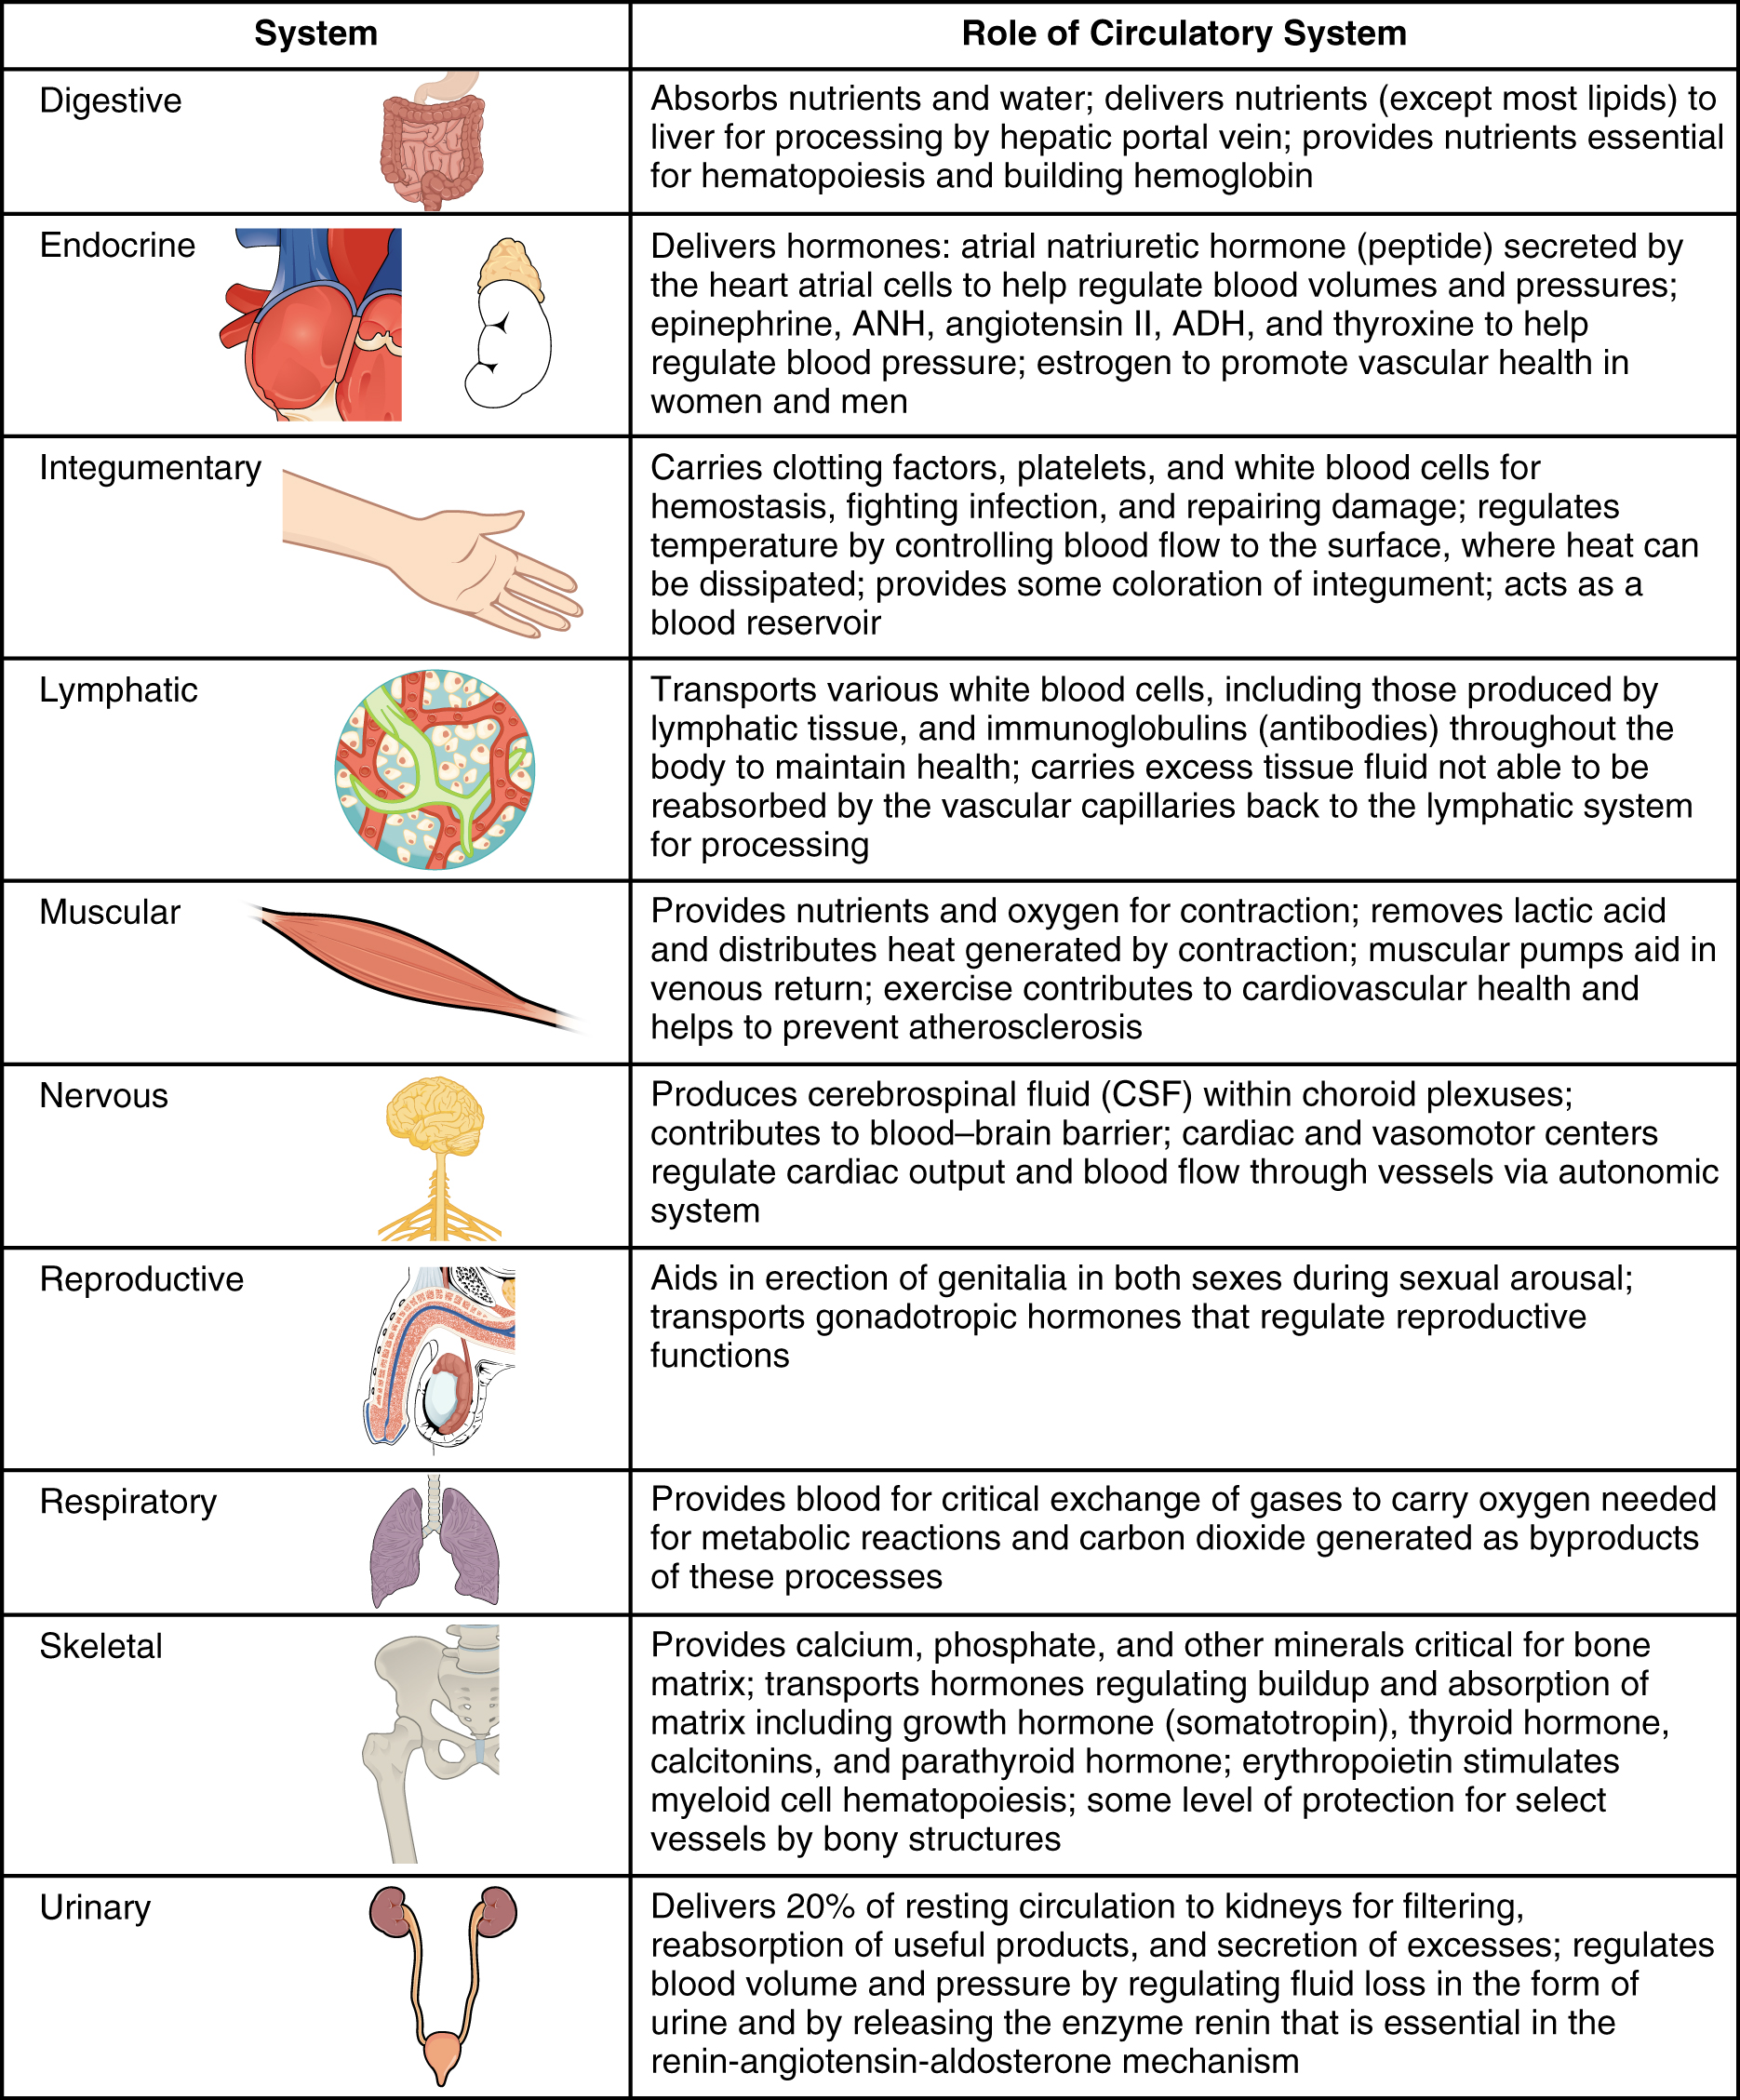 This table outlines the role of the circulatory system in the other organ systems in the body.